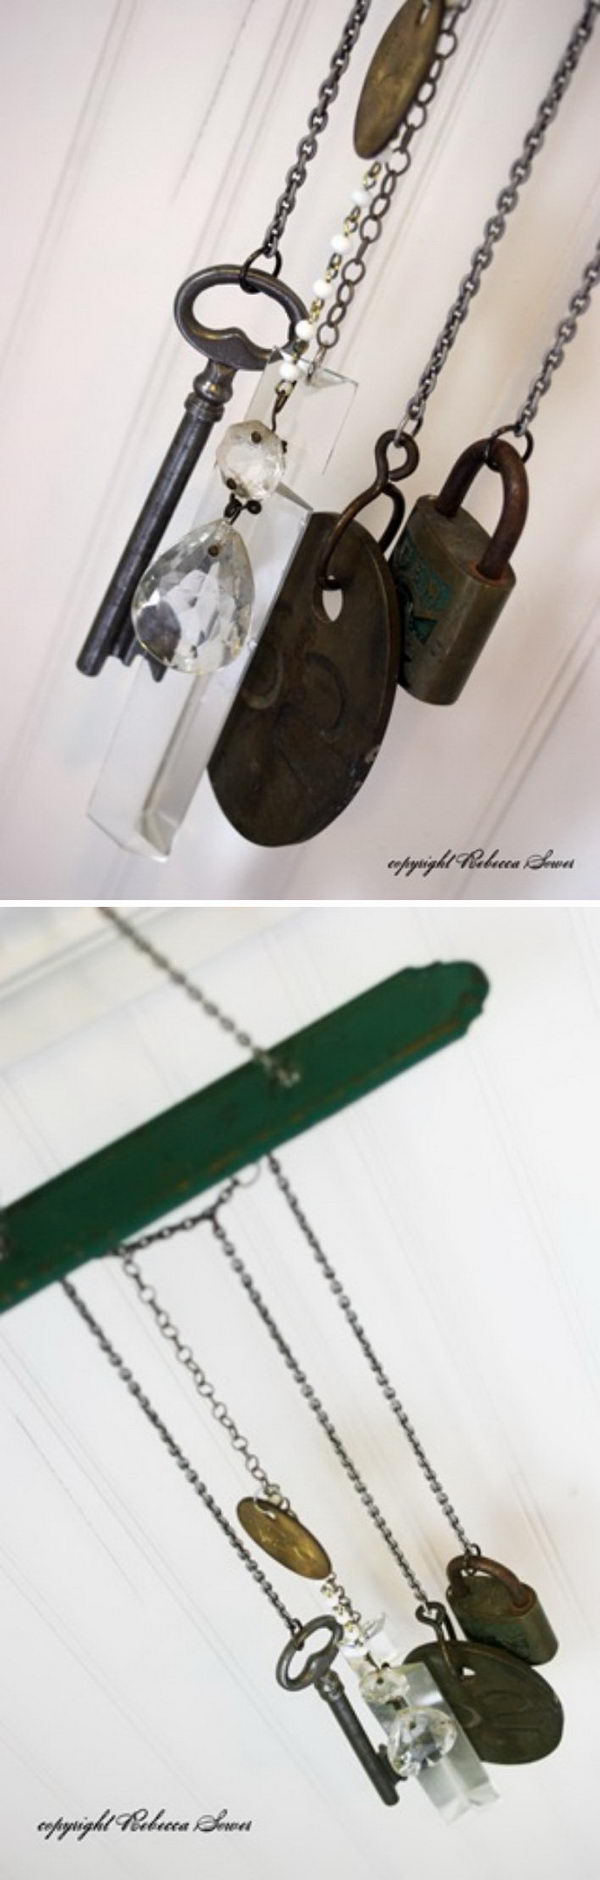 DIY Wind Chime from Upcycled Keys and Other Assorted Junk Items. 